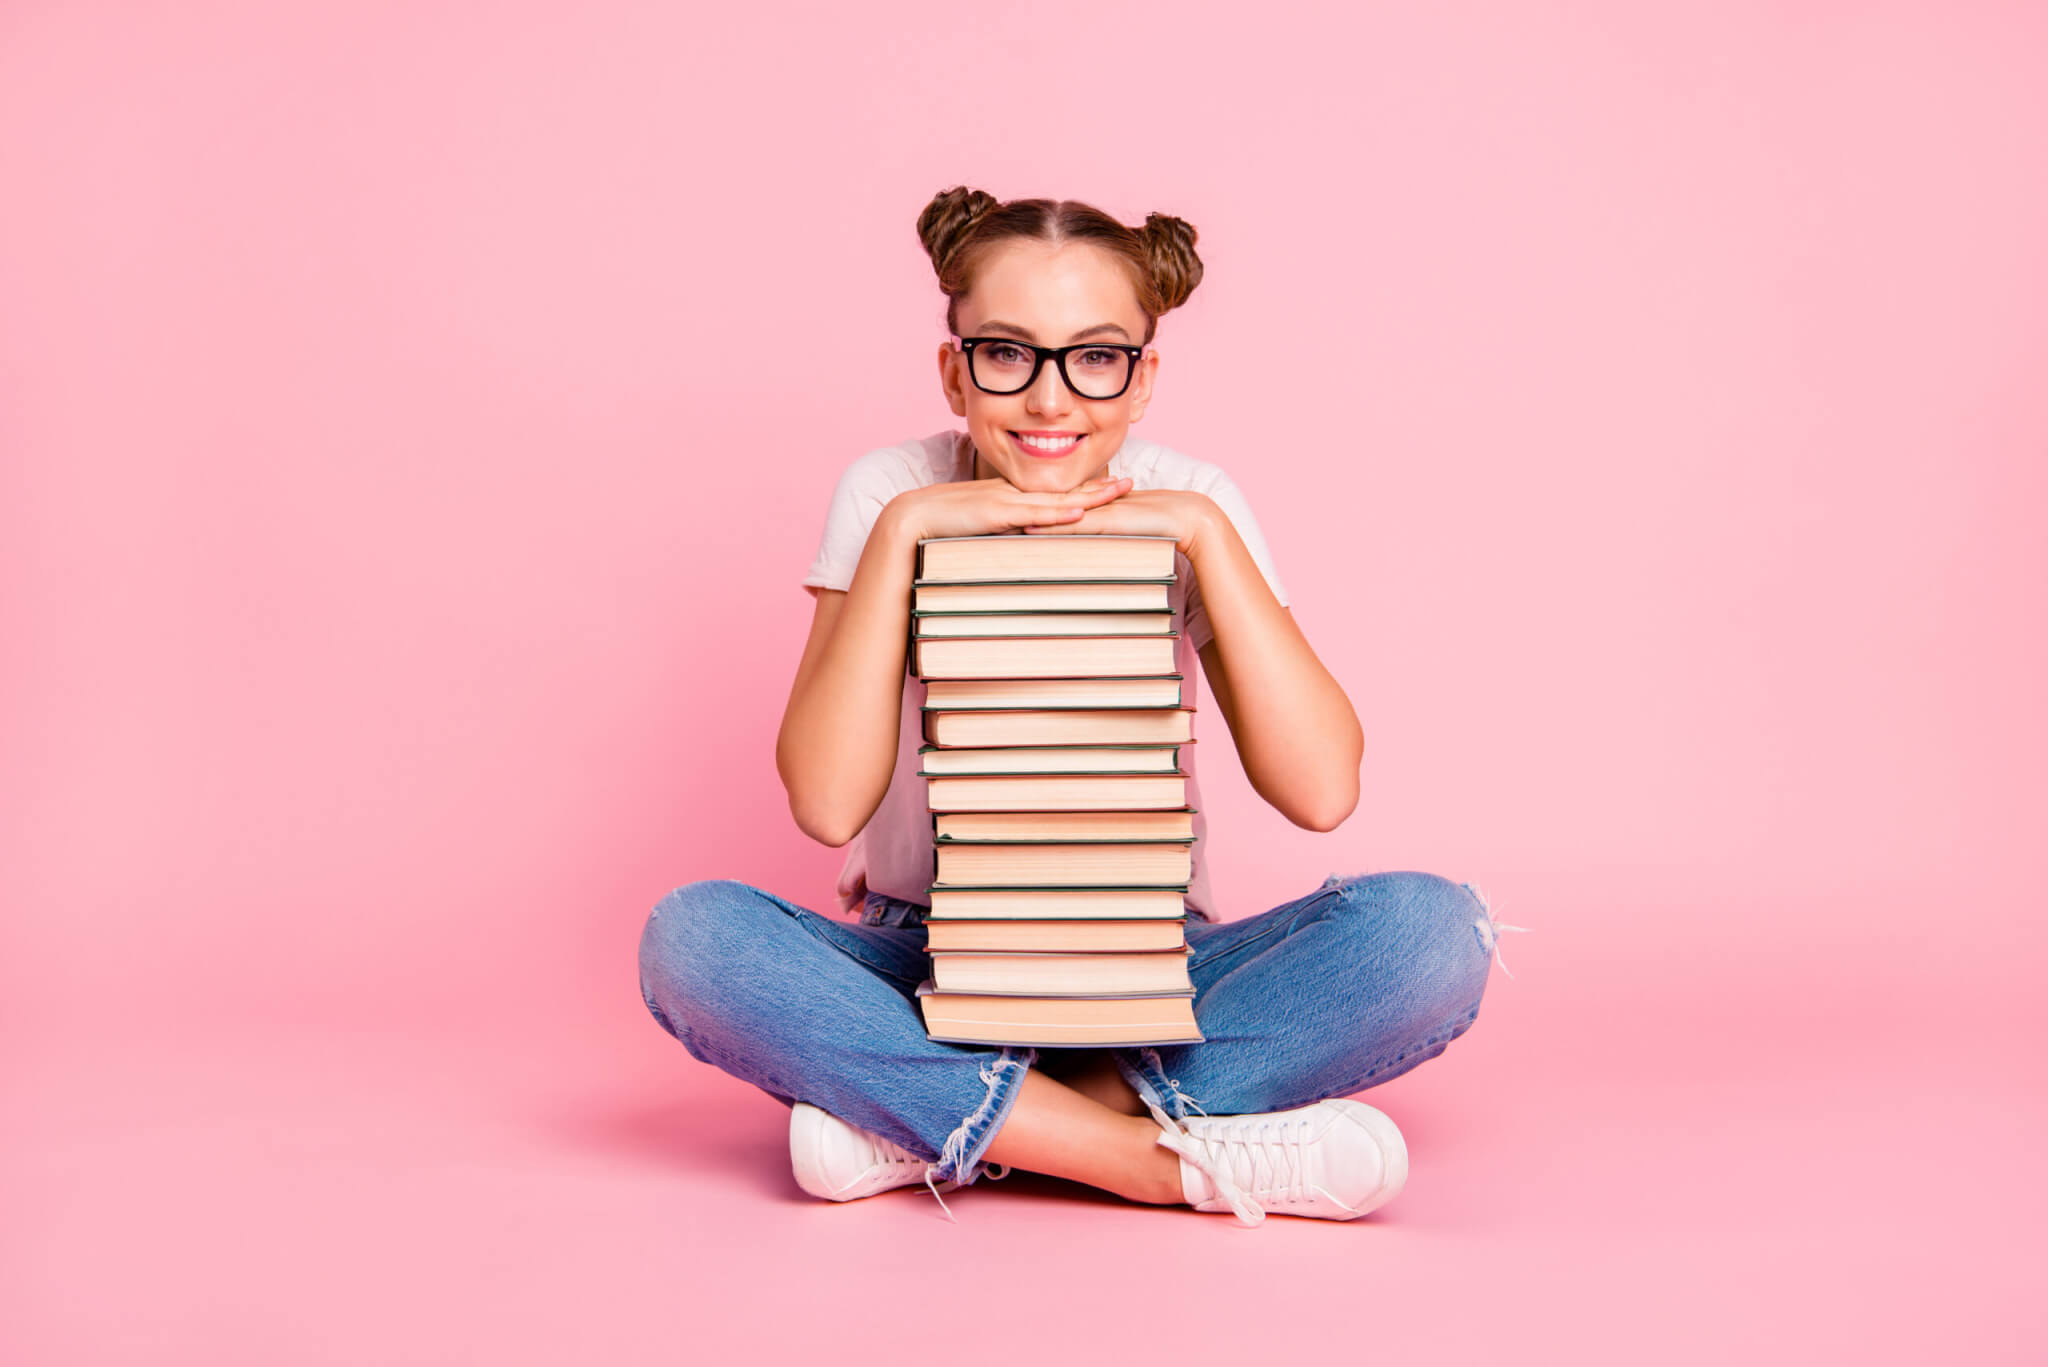 A teenage girl holding a stack of books